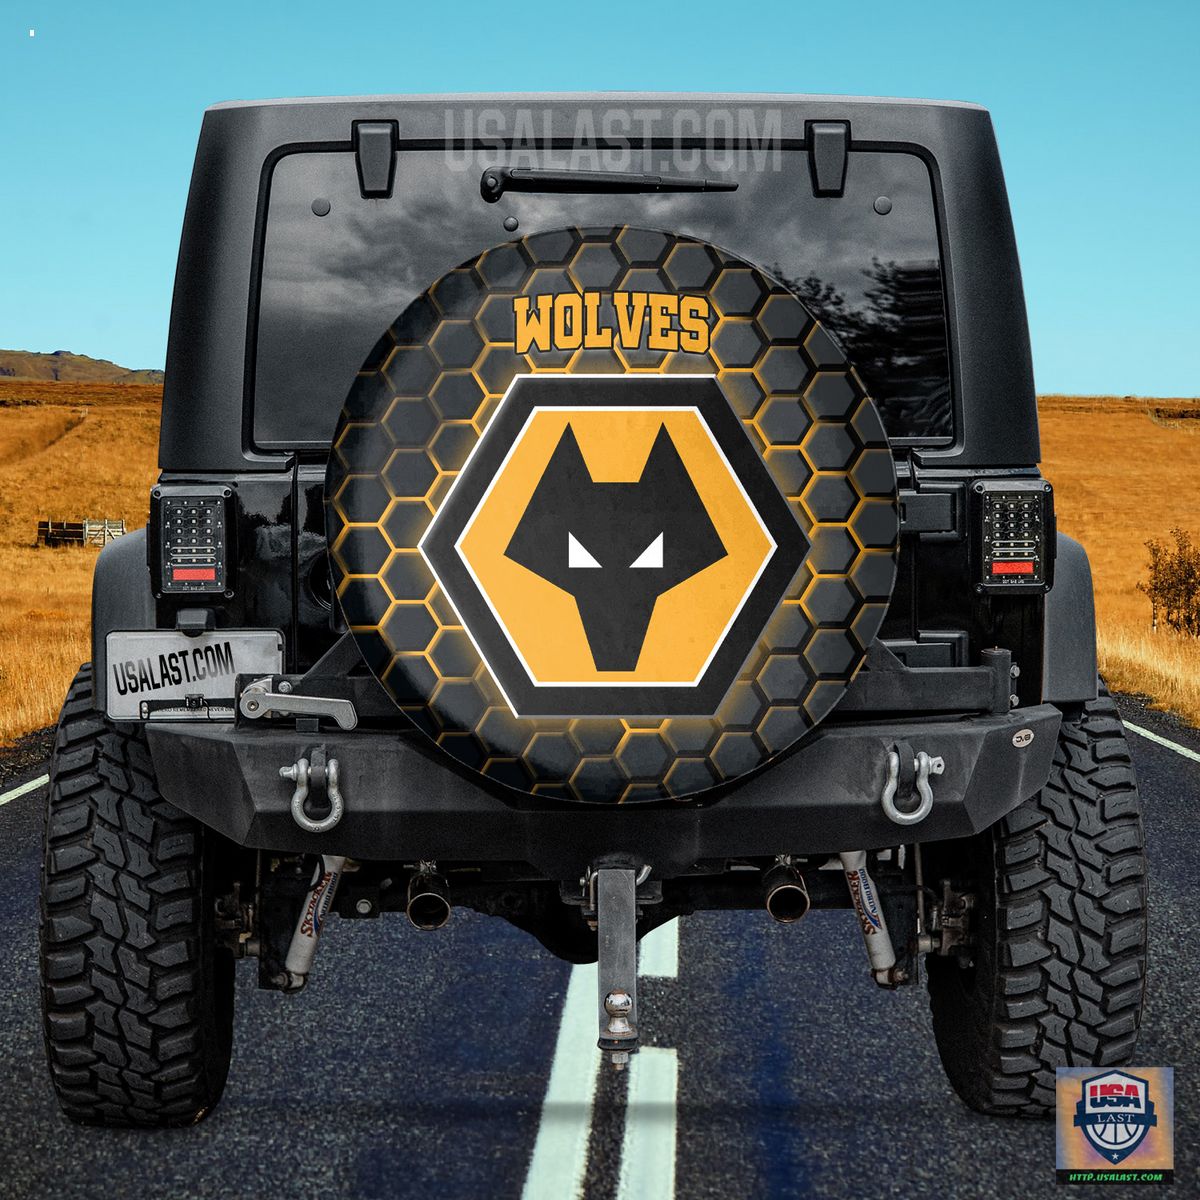 AMAZING Wolverhampton Wanderers FC Spare Tire Cover